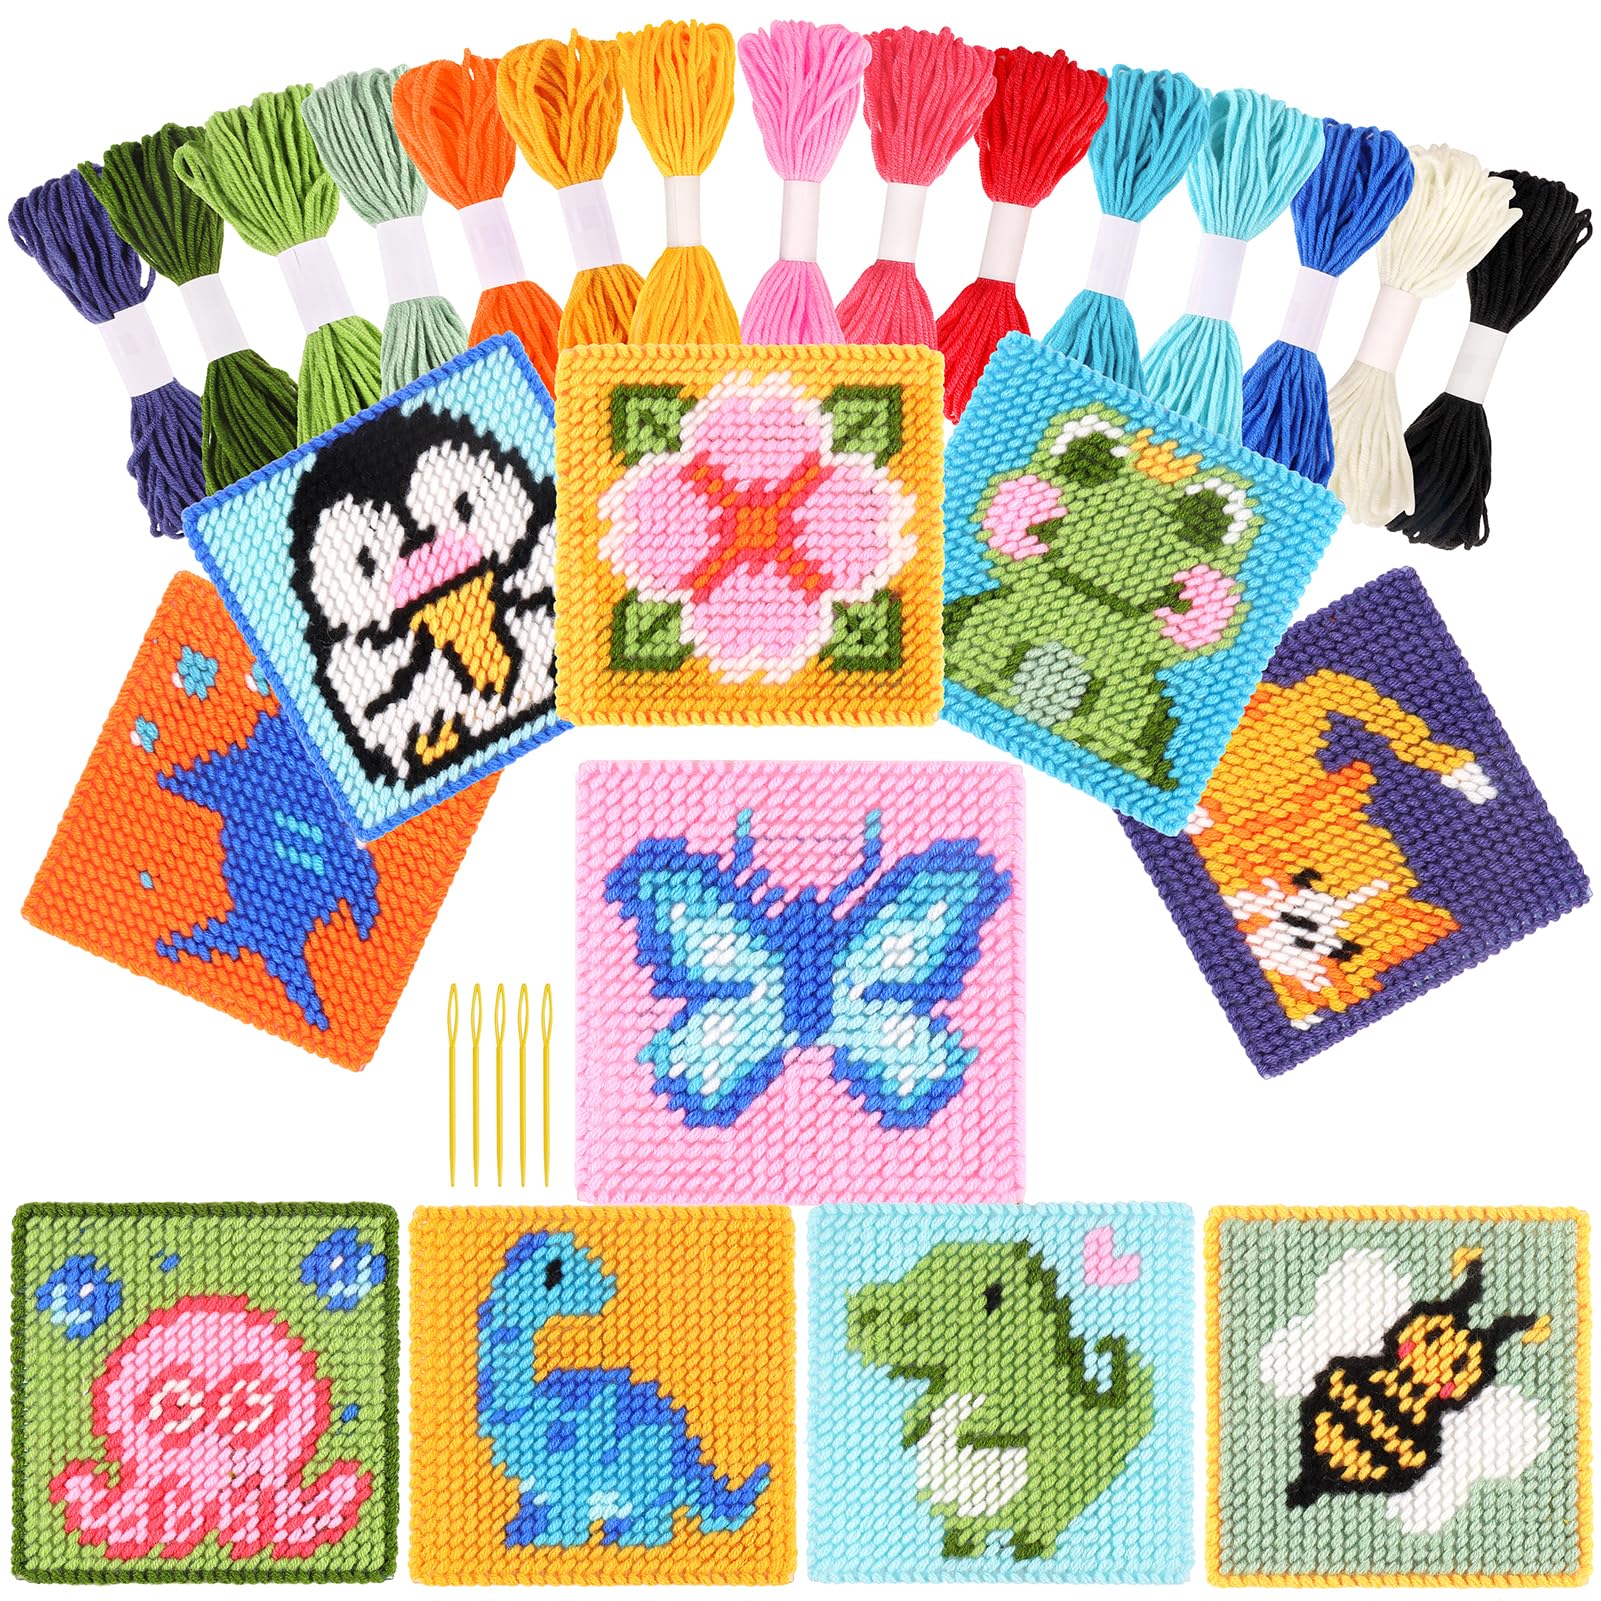 Pllieay 5 PCS Cross Stitch Kits for Beginners for Kids 7-13, Sewing Kit for  Kids with Instructions for Backpack Charms, Ornaments and Needle Craft